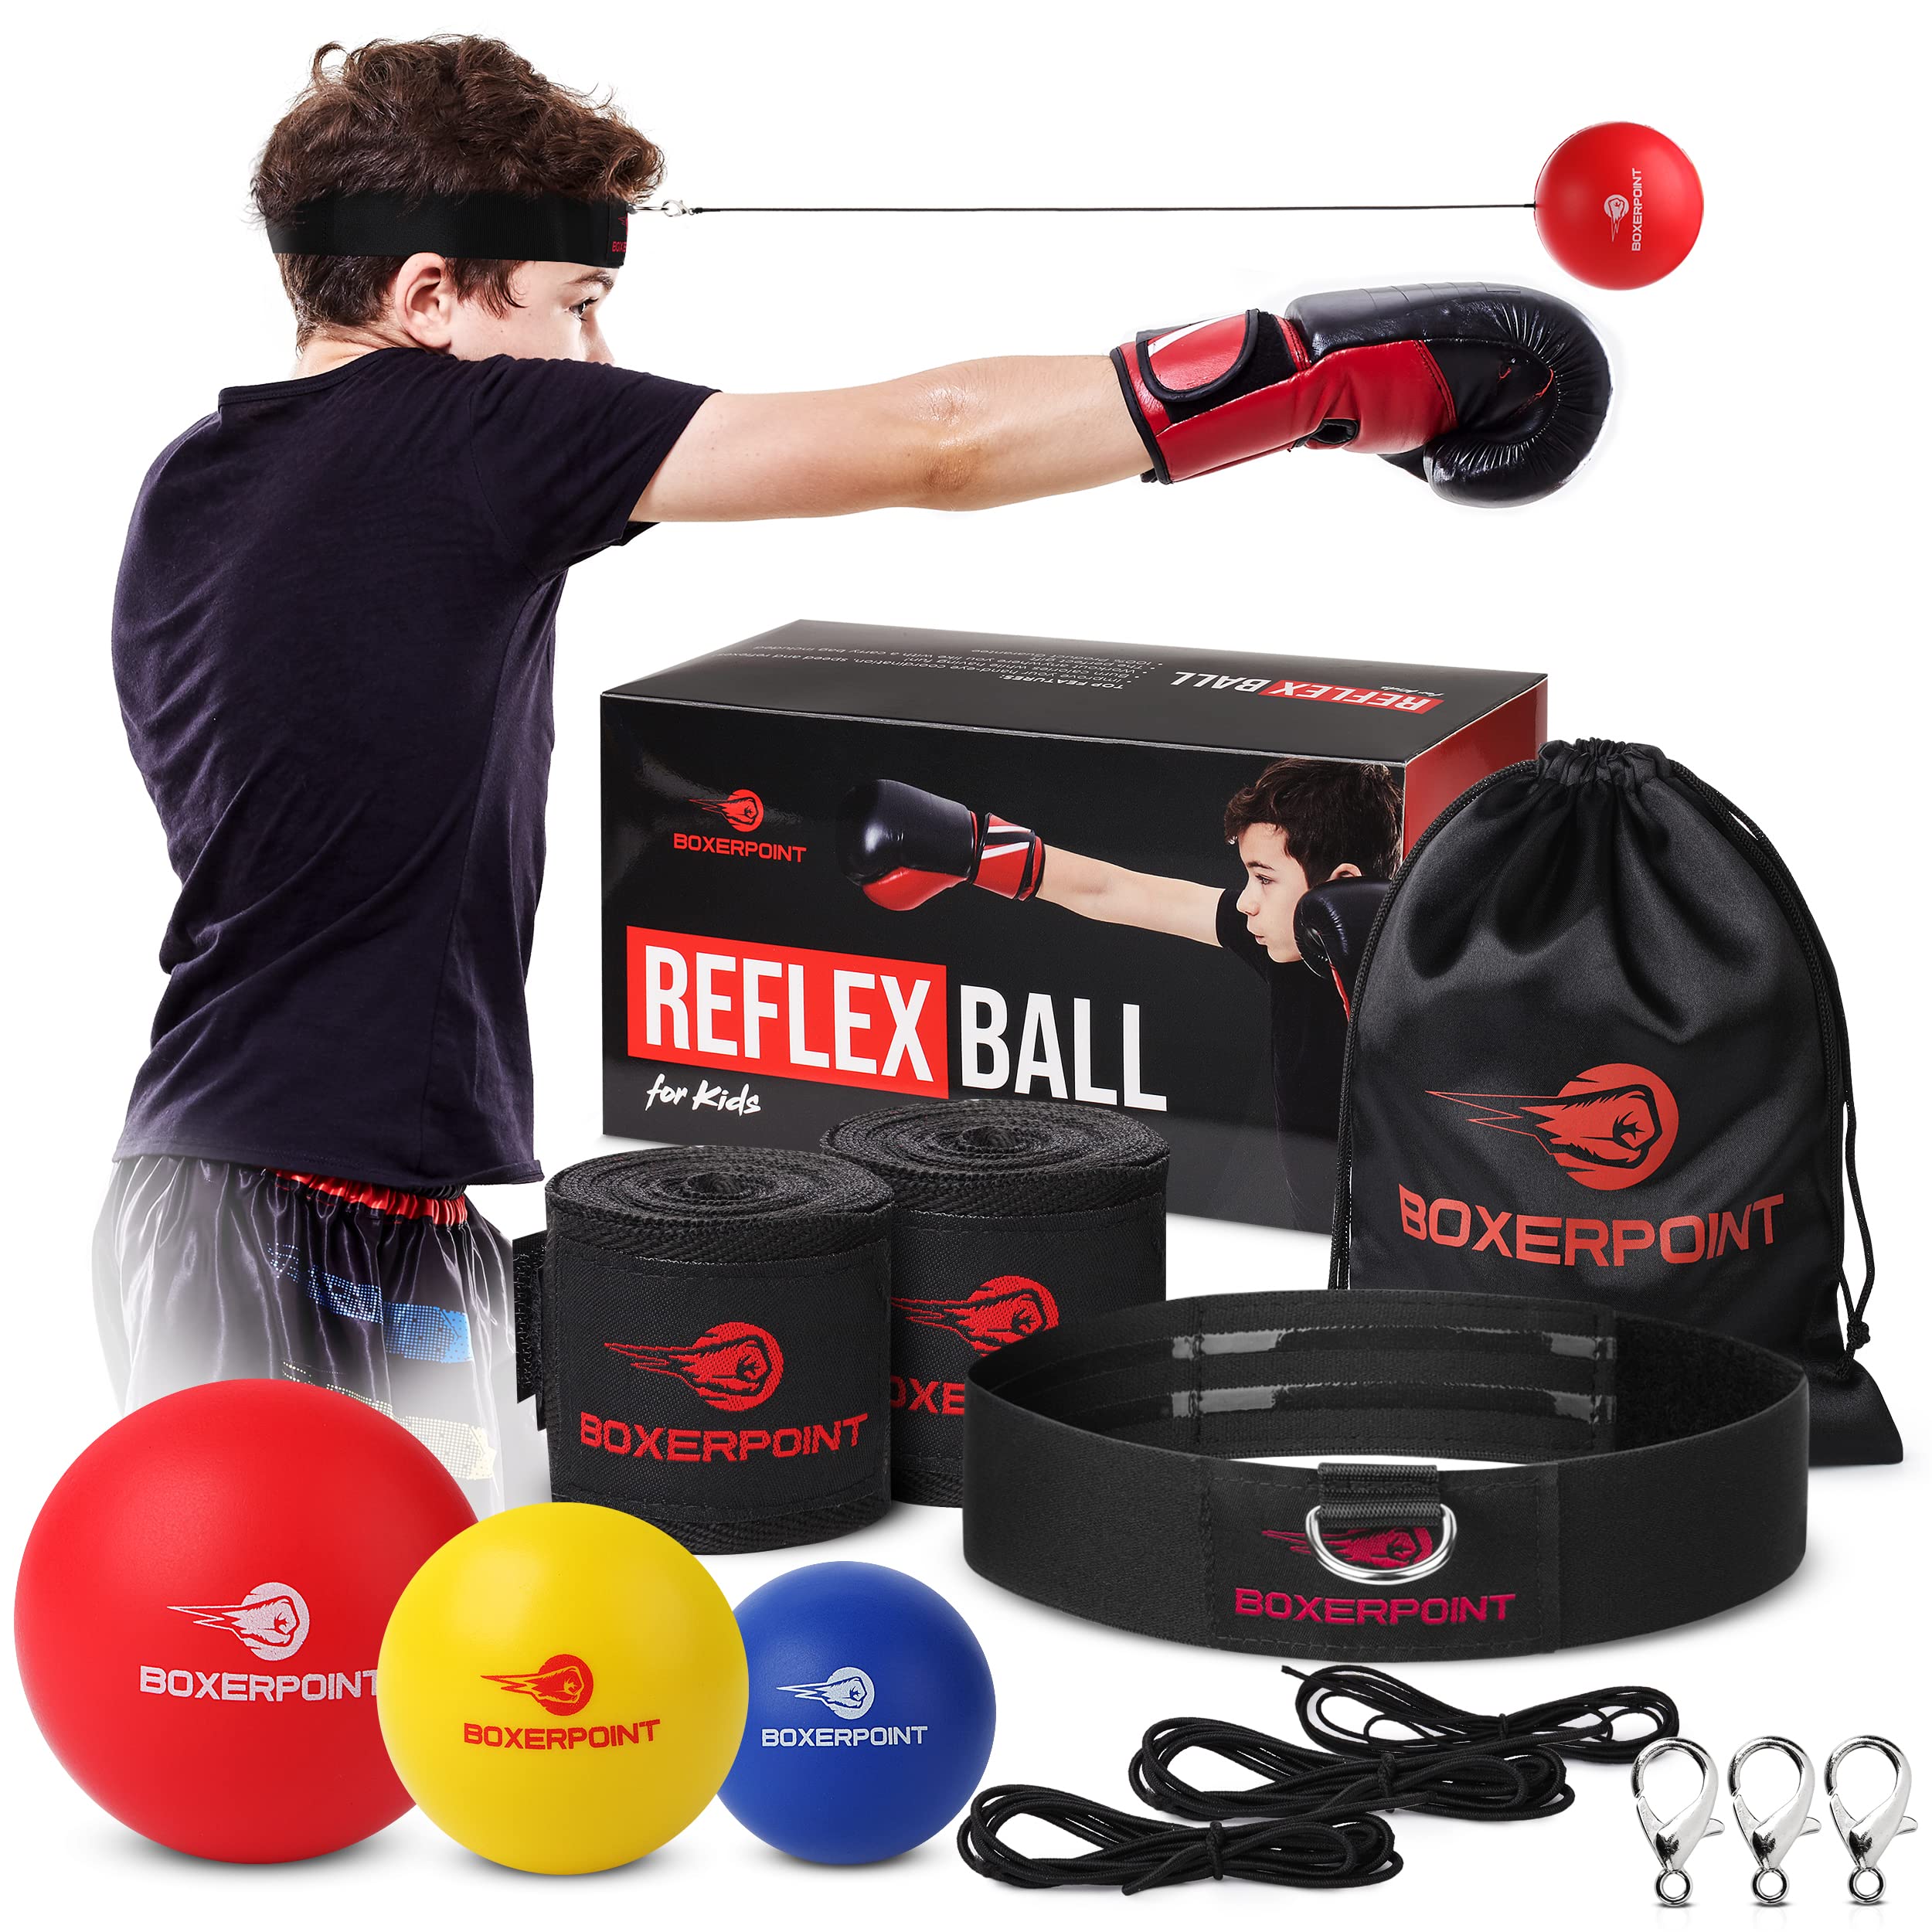 Boxing Reflex Ball for Adults and Kids - React Reflex Balls on String with  Headband, Carry Bag and Hand Wraps - Improve Hand Eye Coordination,  Punching Speed, Fight Reaction Set of 3